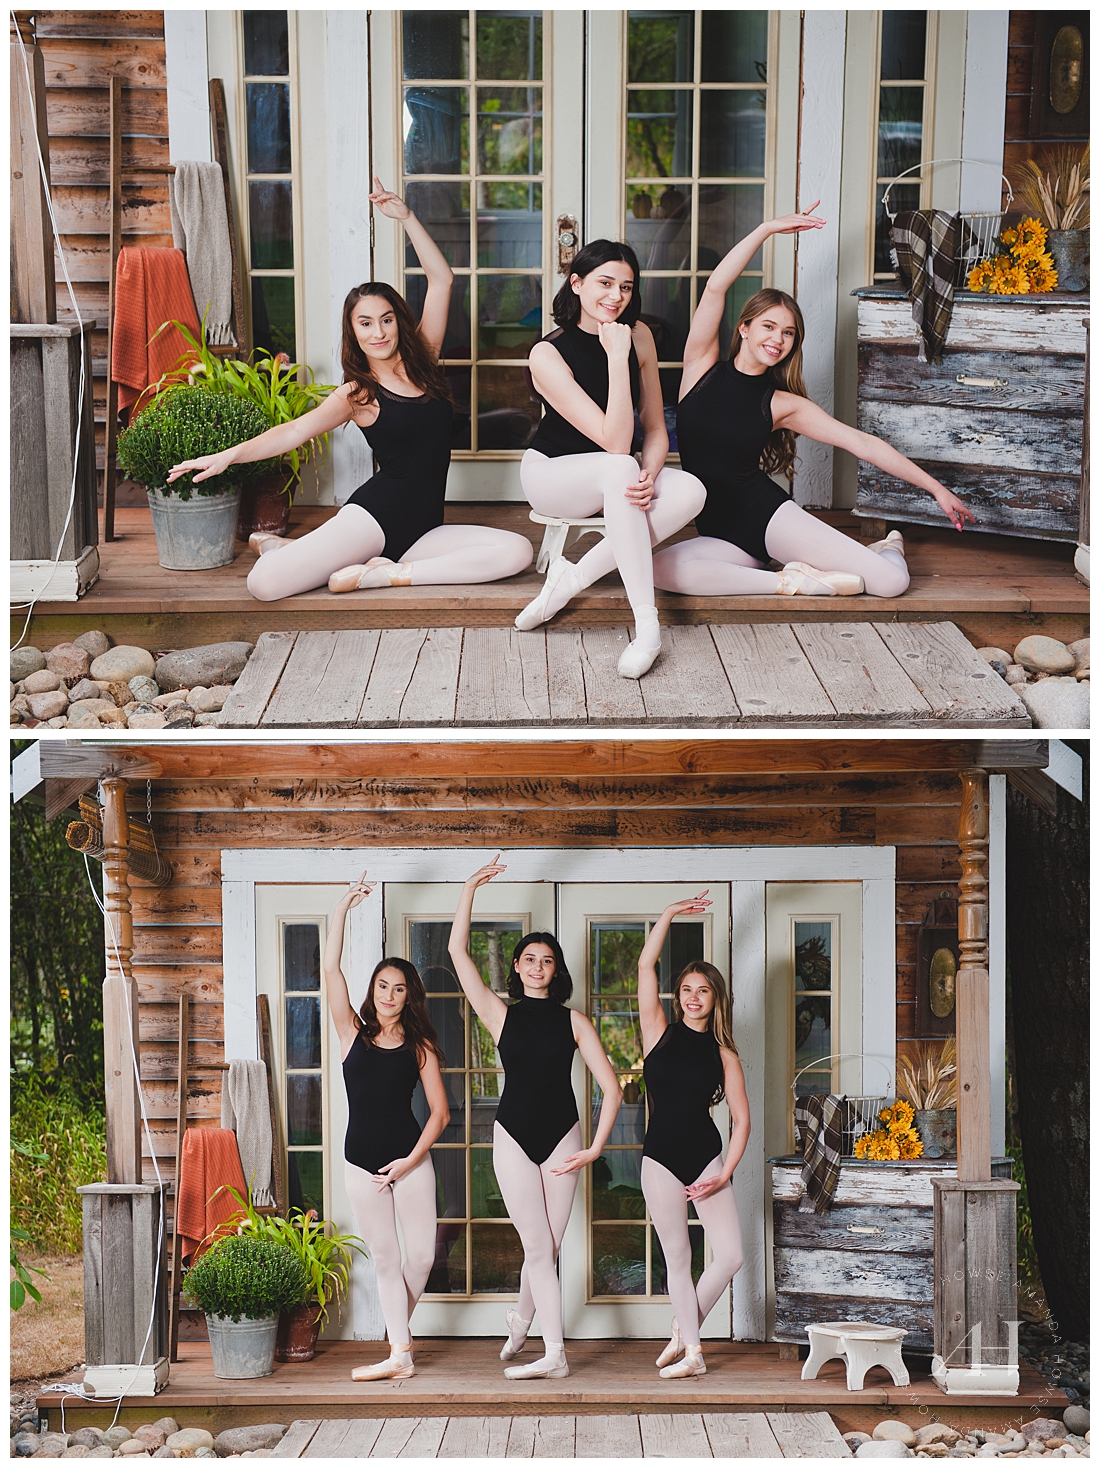 Mud Wall Farm House Photos with Three Ballerinas in Matching Leotards and Tights | Ballerina Portrait Sessions Photographed by Tacoma Senior Photographer Amanda Howse